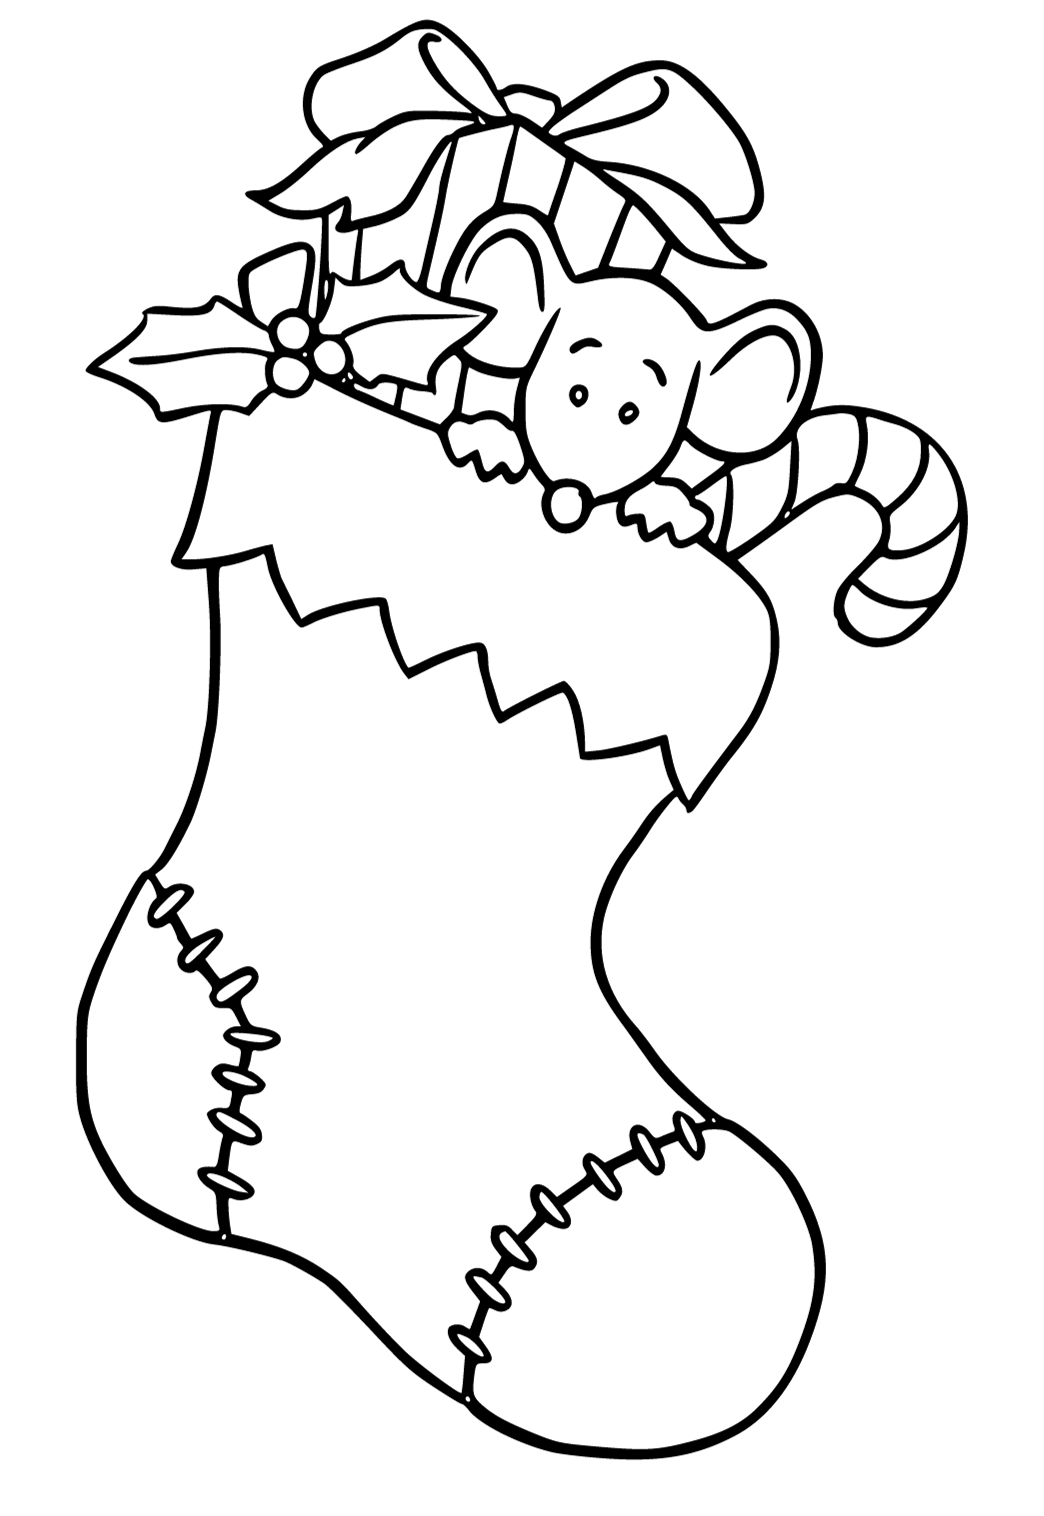 Free printable christmas mouse coloring page for adults and kids